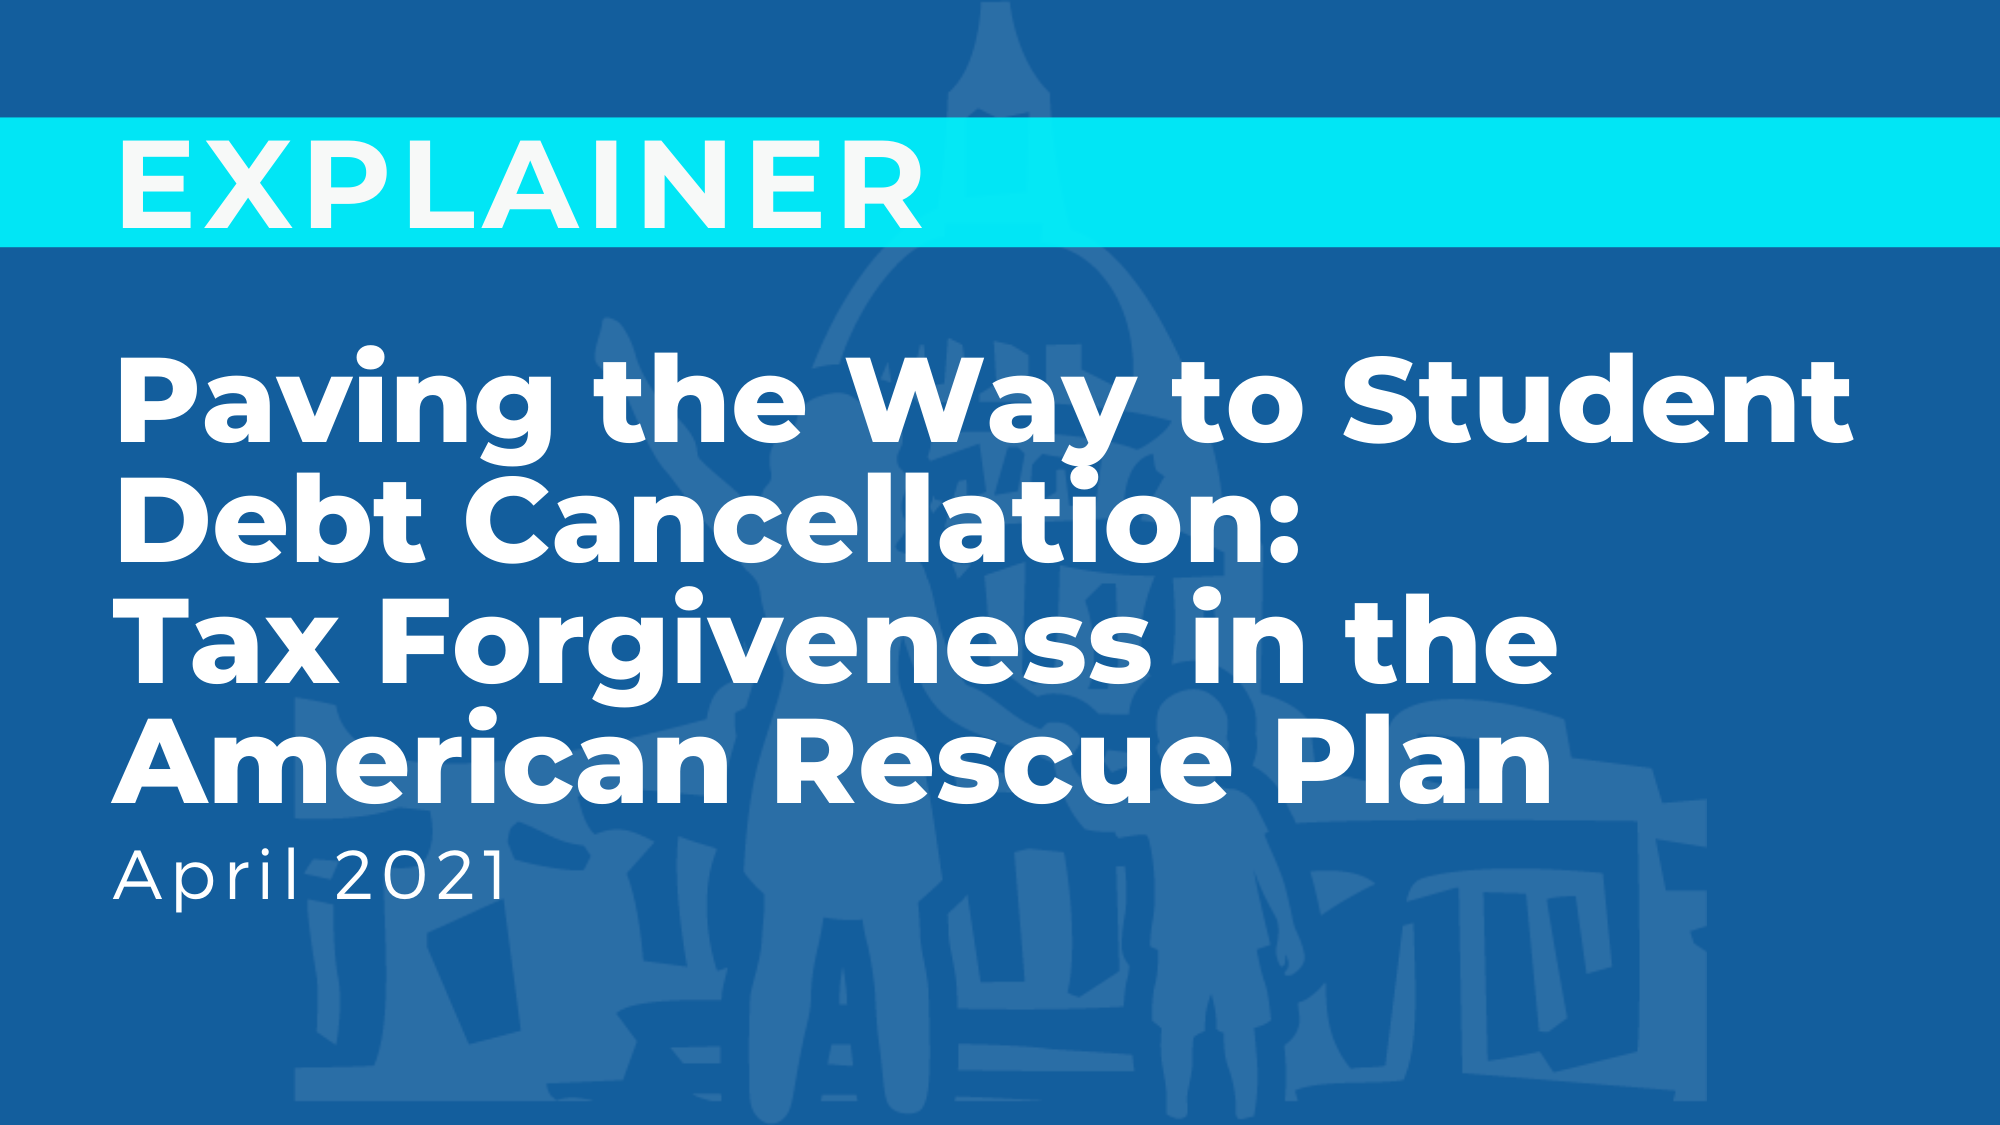 Paving the Way to Student Debt Cancellation: Tax Forgiveness in the American Rescue Plan